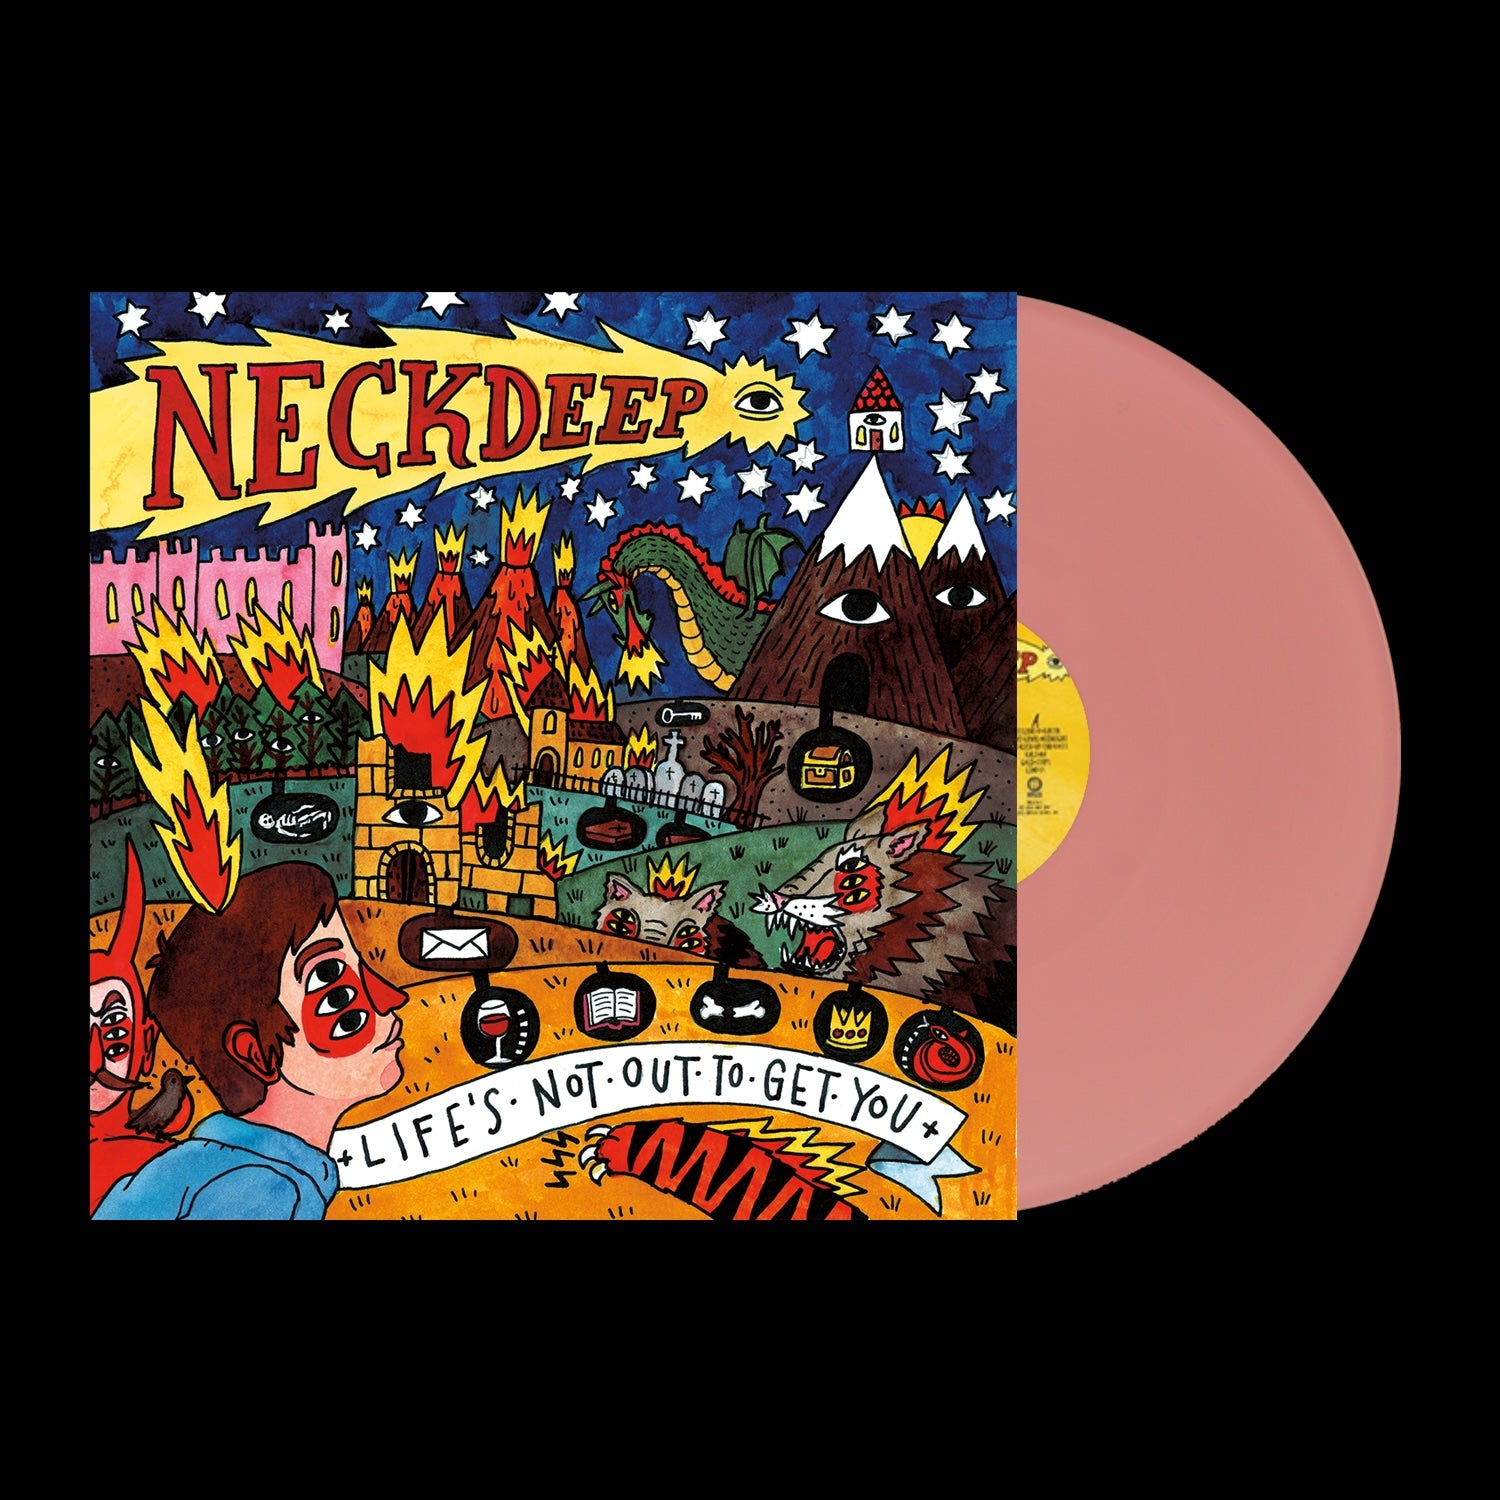 Neck Deep - Life's Not Out To Get You: Light Pink Vinyl LP